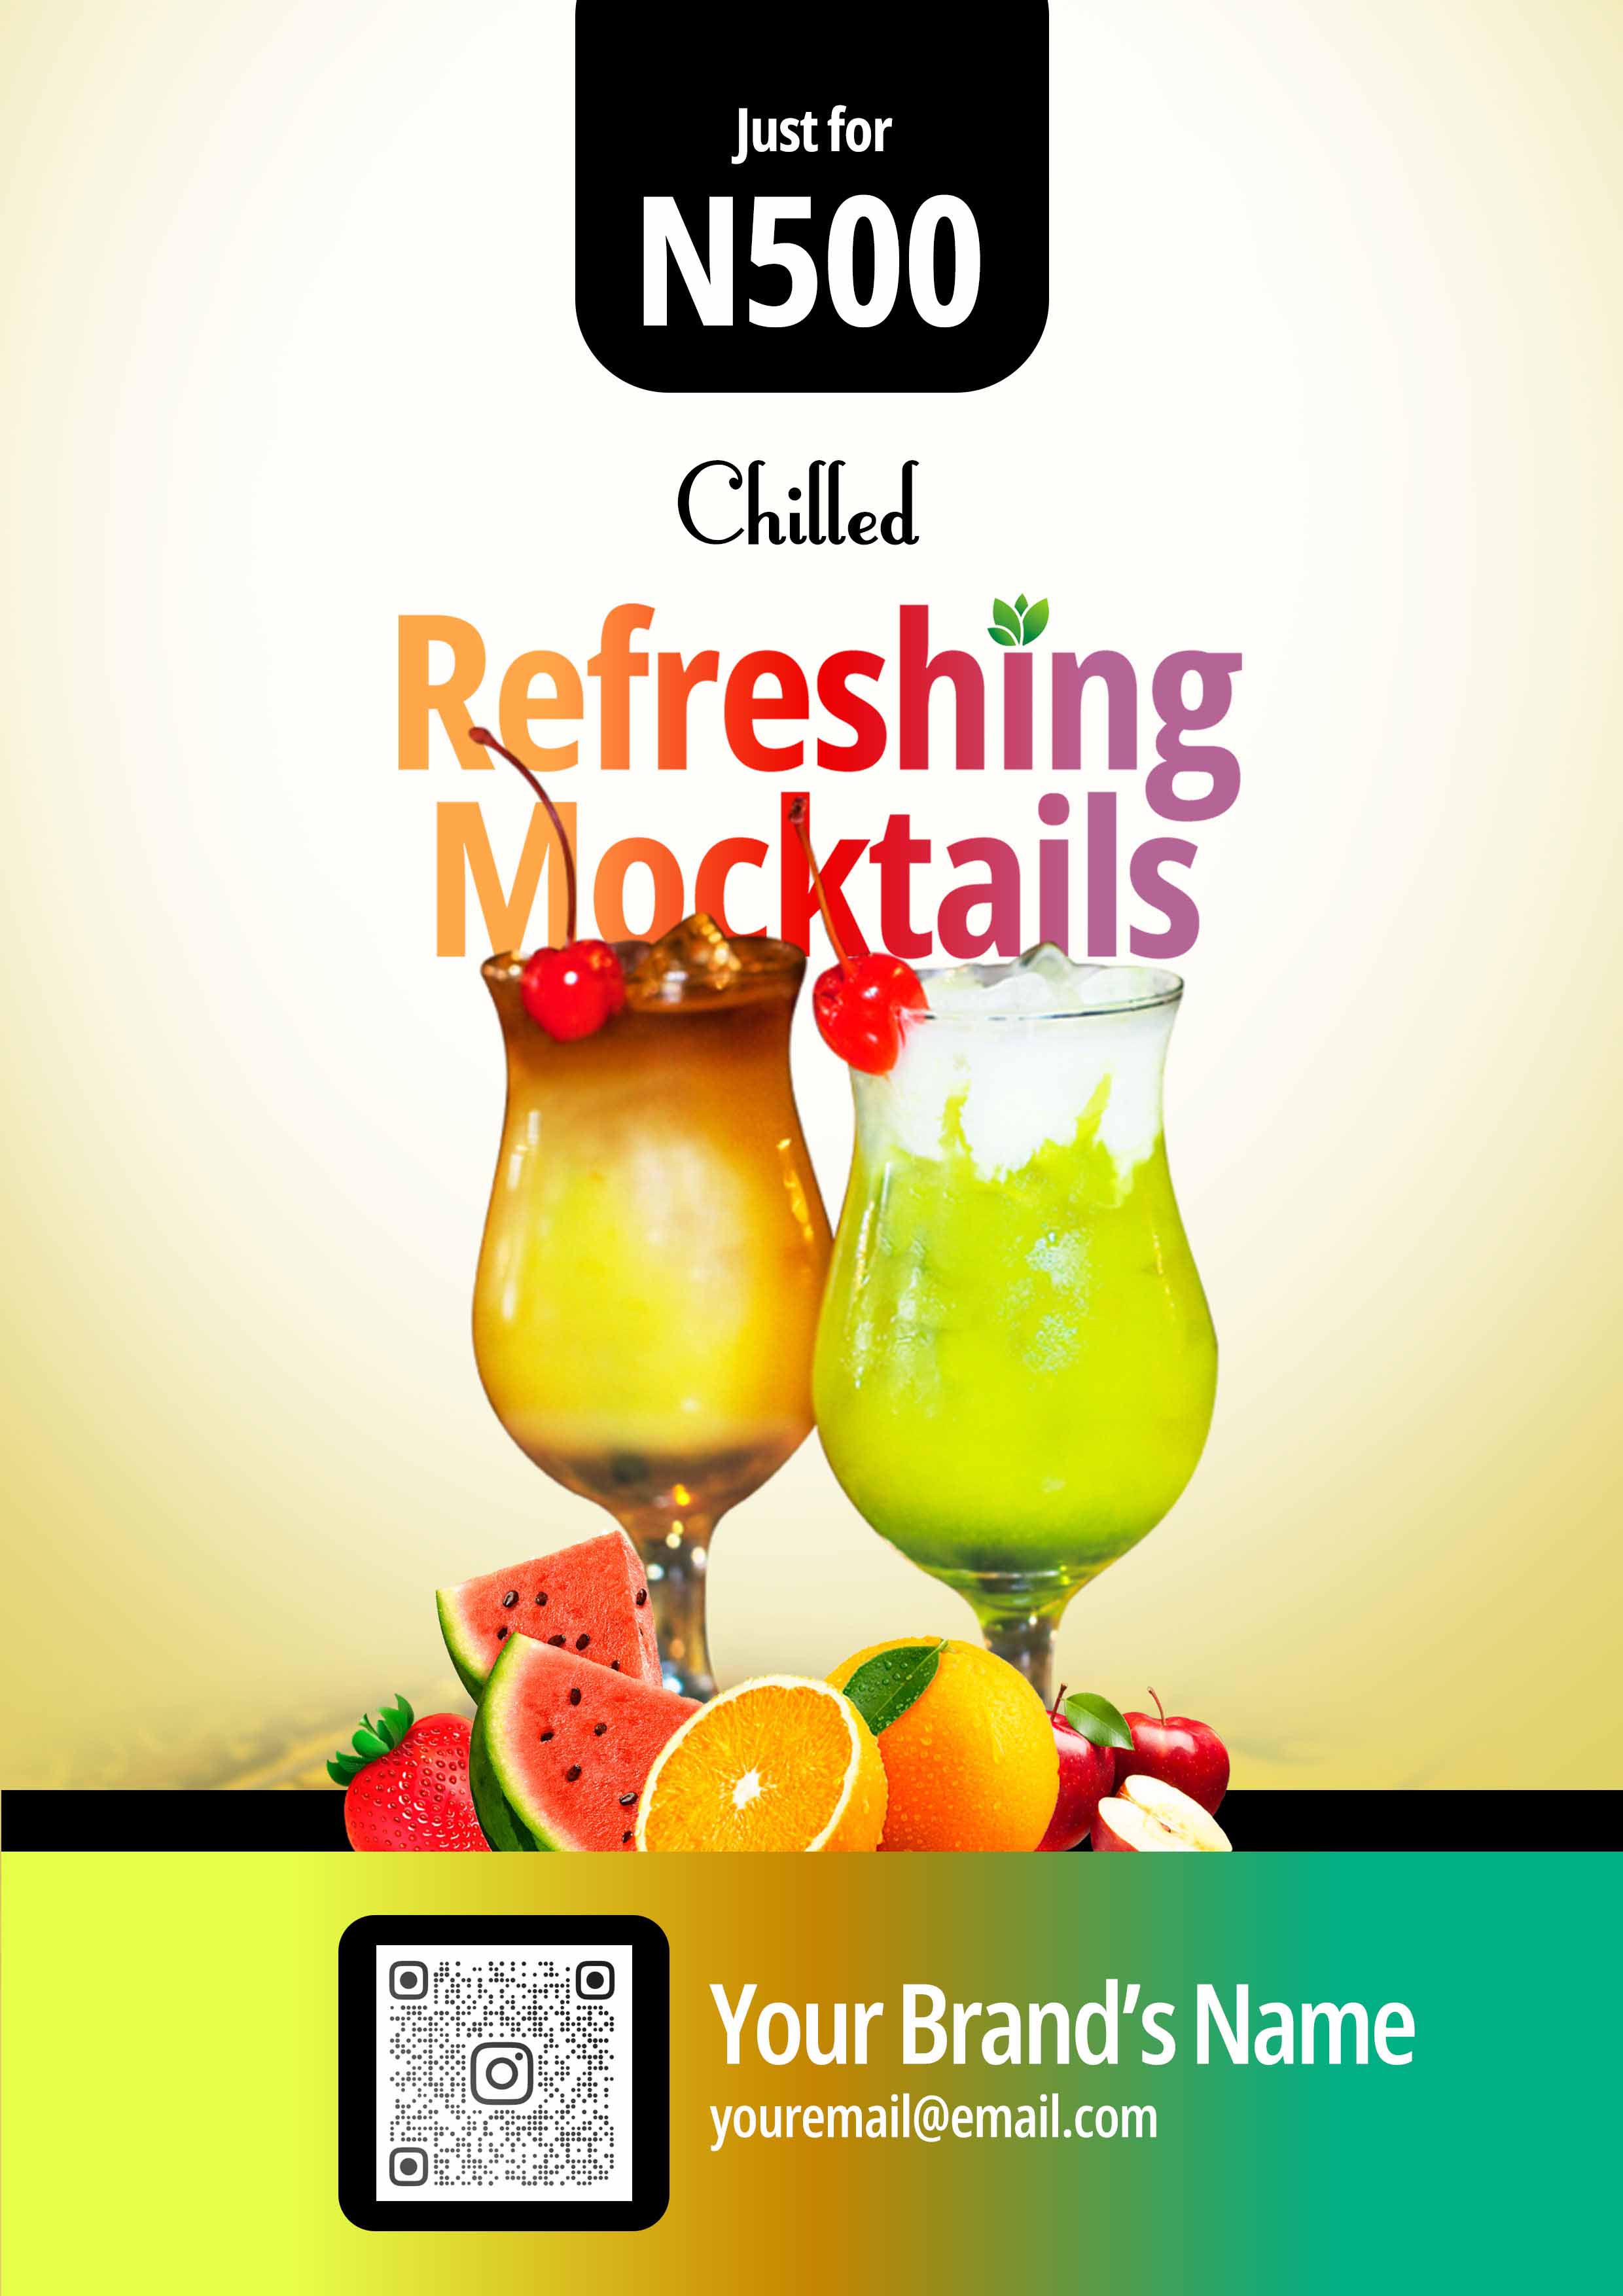 Mocktail refreshing flyer with price tag.jpg